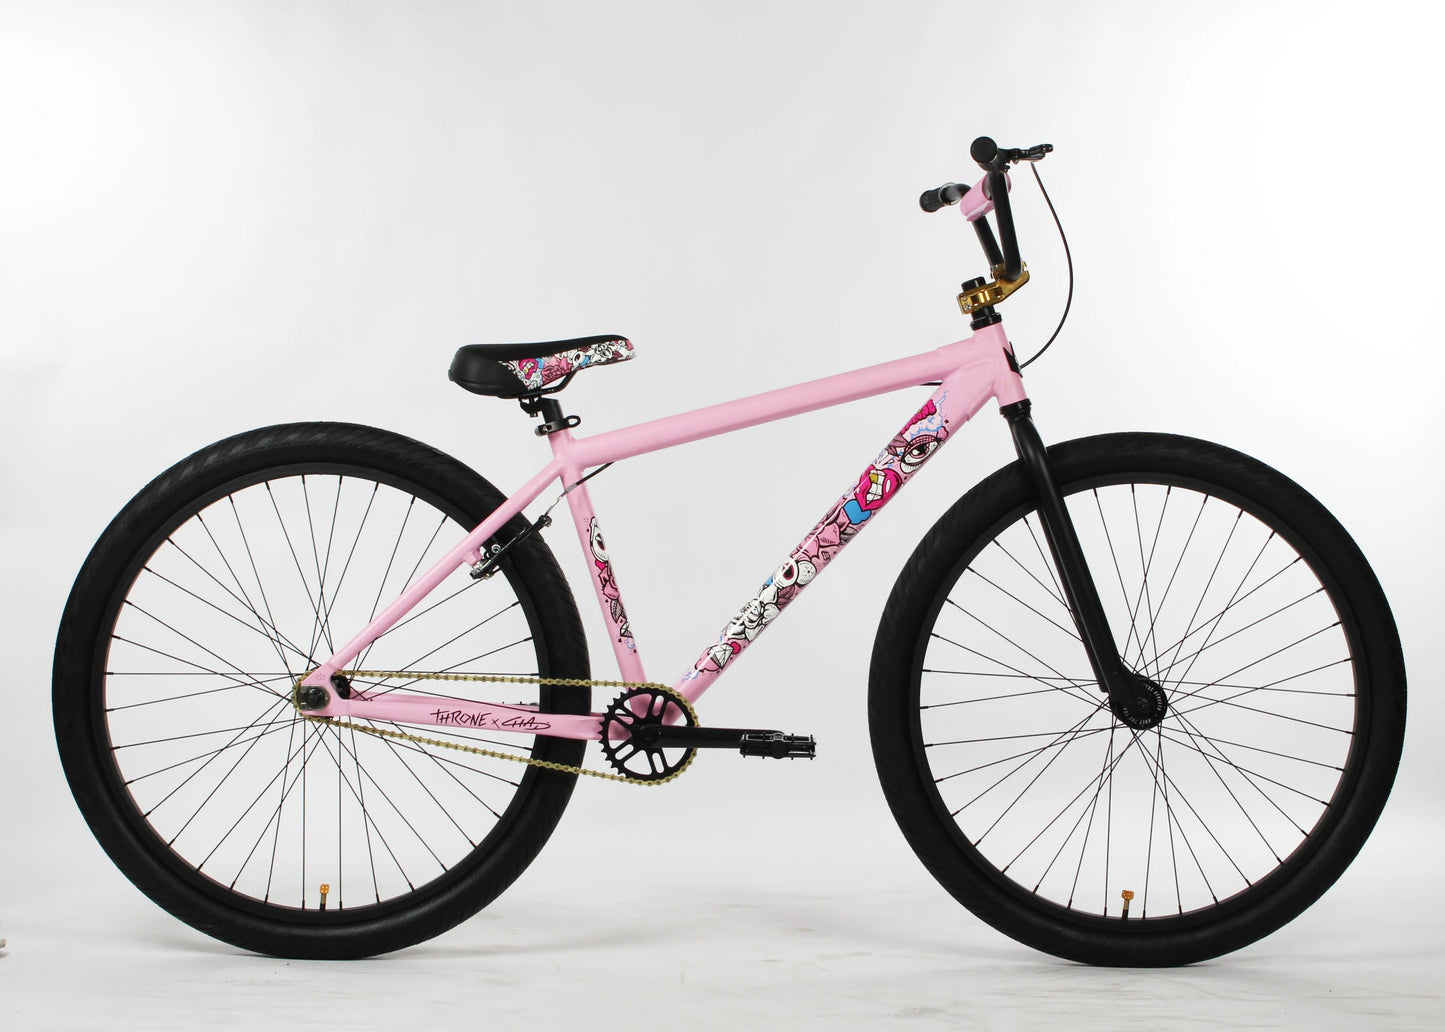 Throne Cycles The Goon - Chad Pink  | Fixed Gear Urban BMX Bike | Urban Bike | The Goon Cycle | Throne Cycle | Street Cycle | Throne BMX | BMX Bike | Bike Lover USA